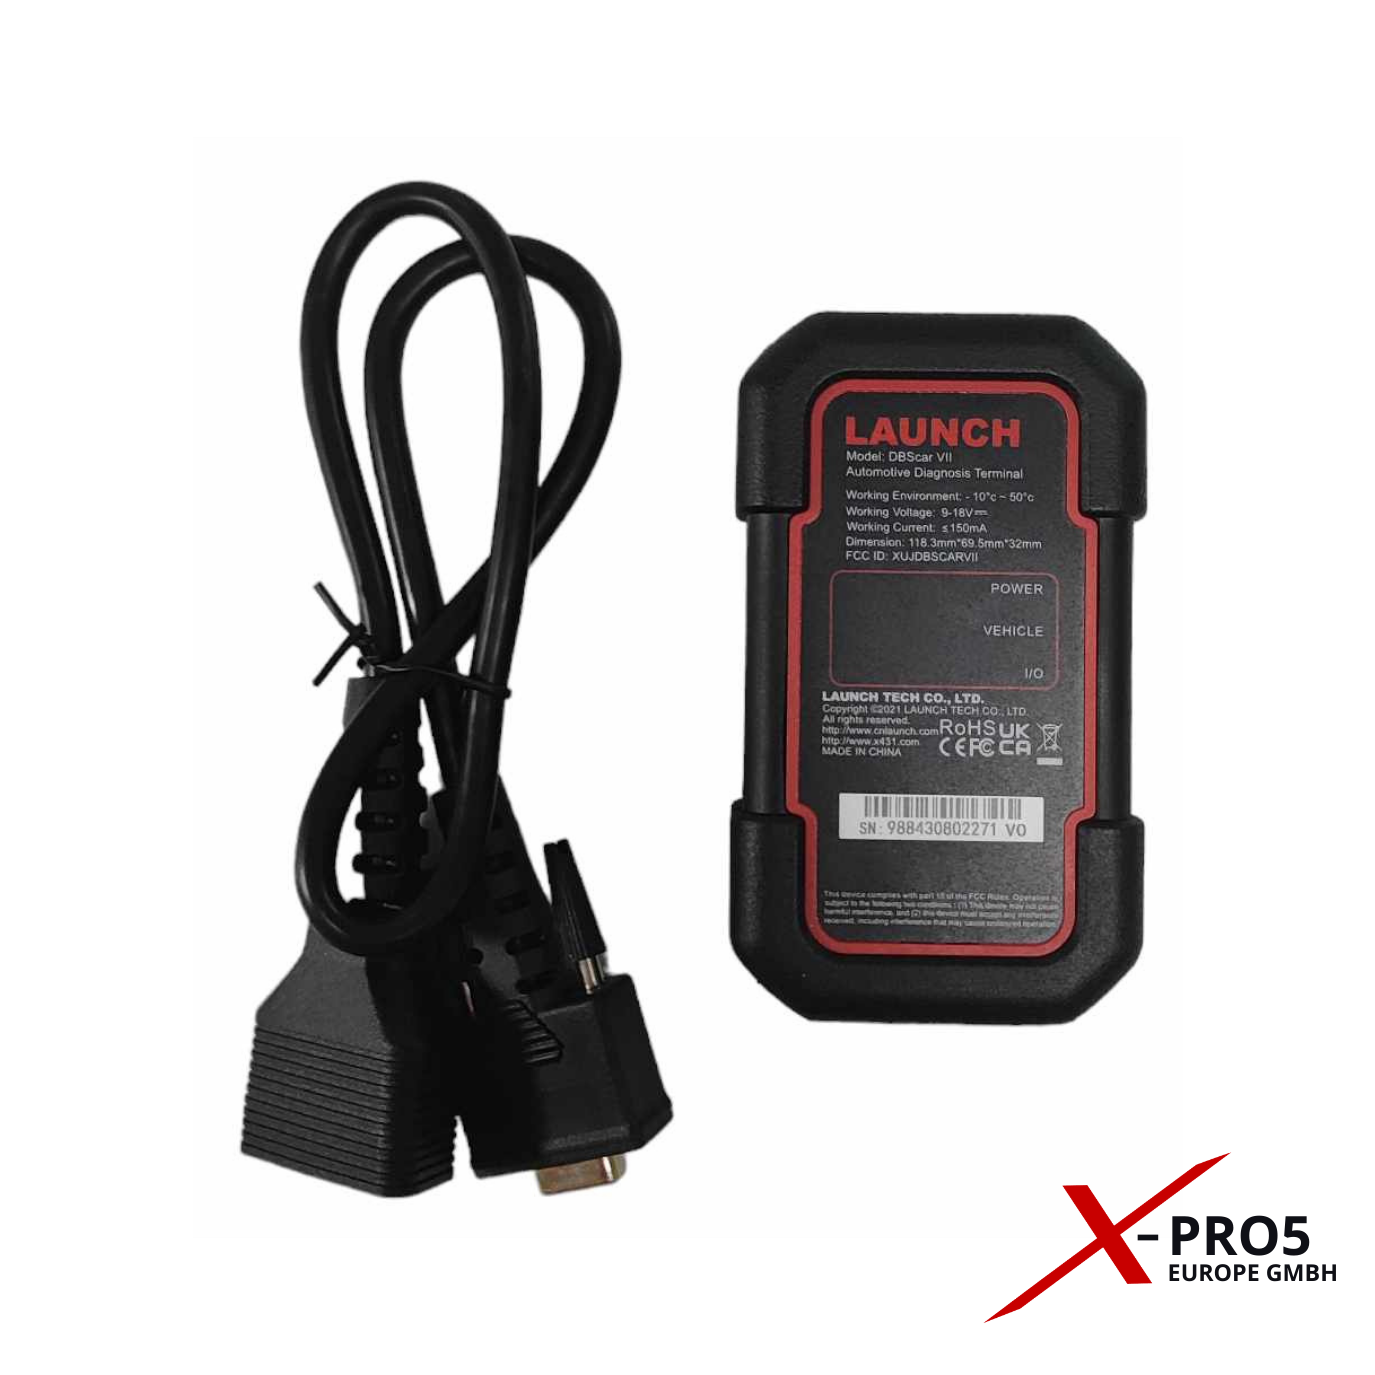 OBD I Adapter Switch Cable for LAUNCH X431 EURO PRO5, LAUNCH-X431-EURO-PRO5